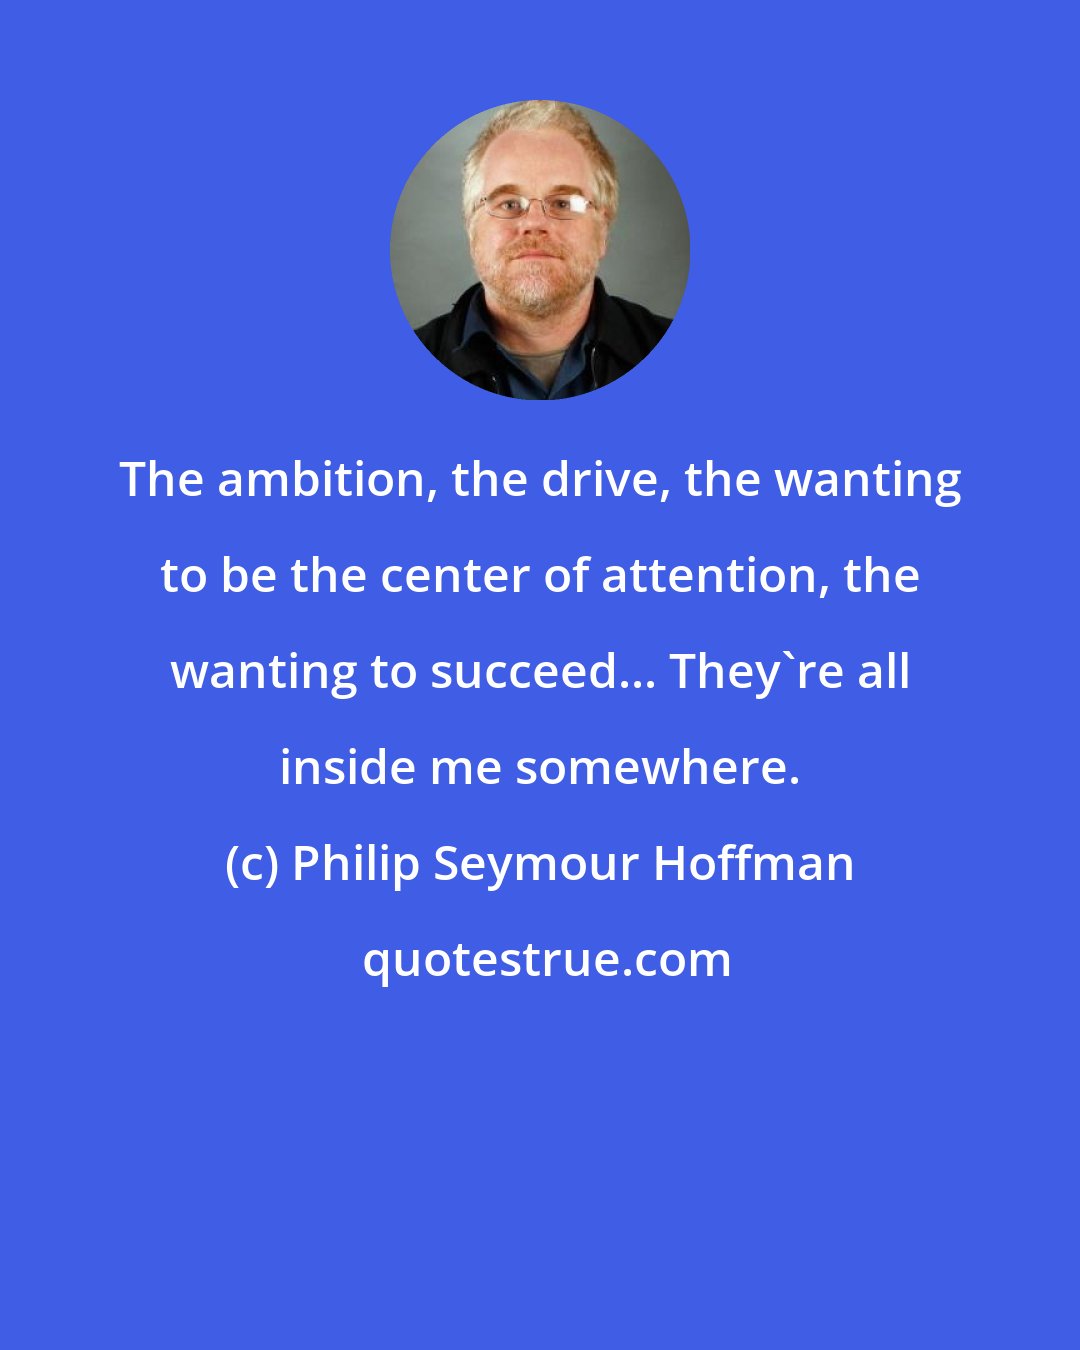 Philip Seymour Hoffman: The ambition, the drive, the wanting to be the center of attention, the wanting to succeed... They're all inside me somewhere.